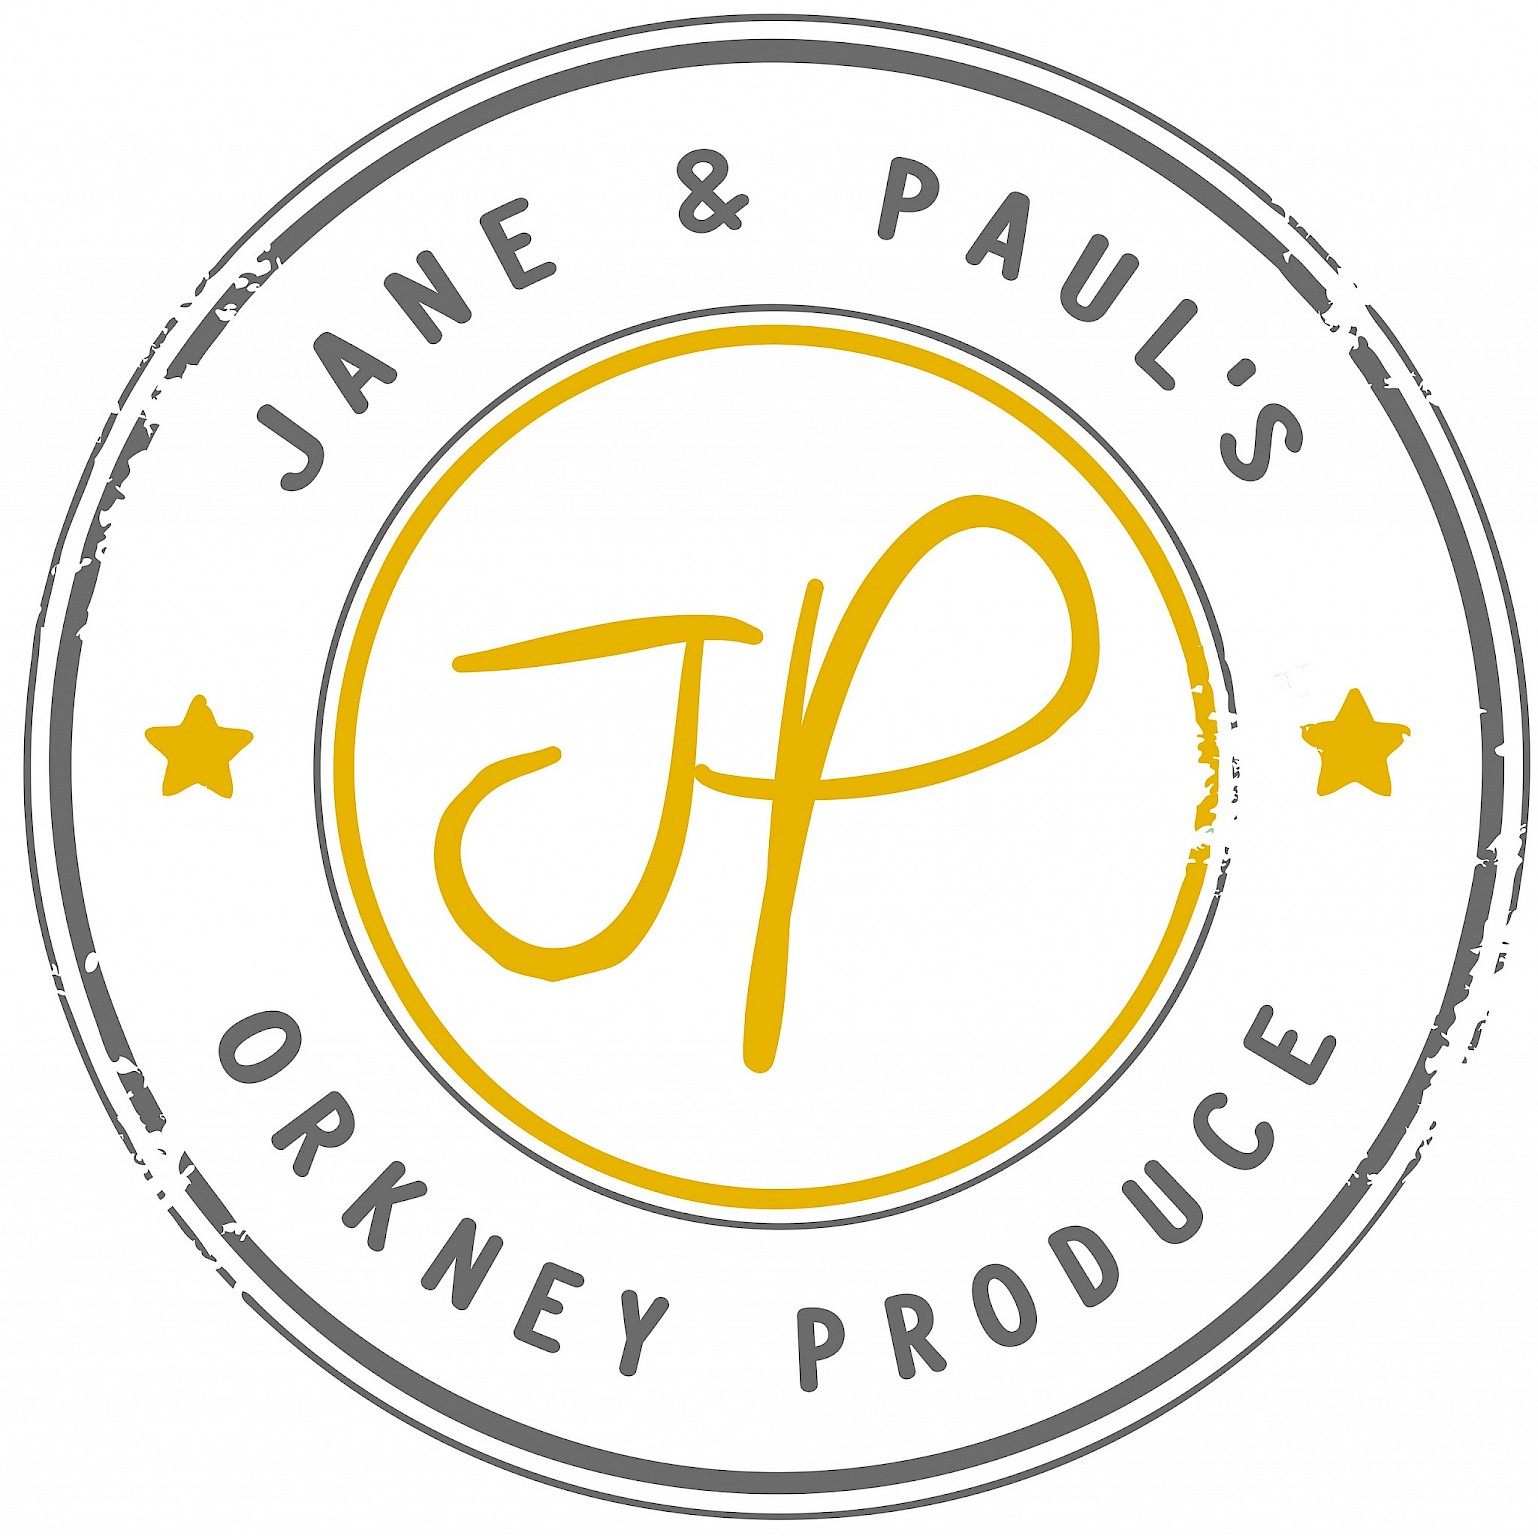 Jane and Paul's Orkney Produce Logo